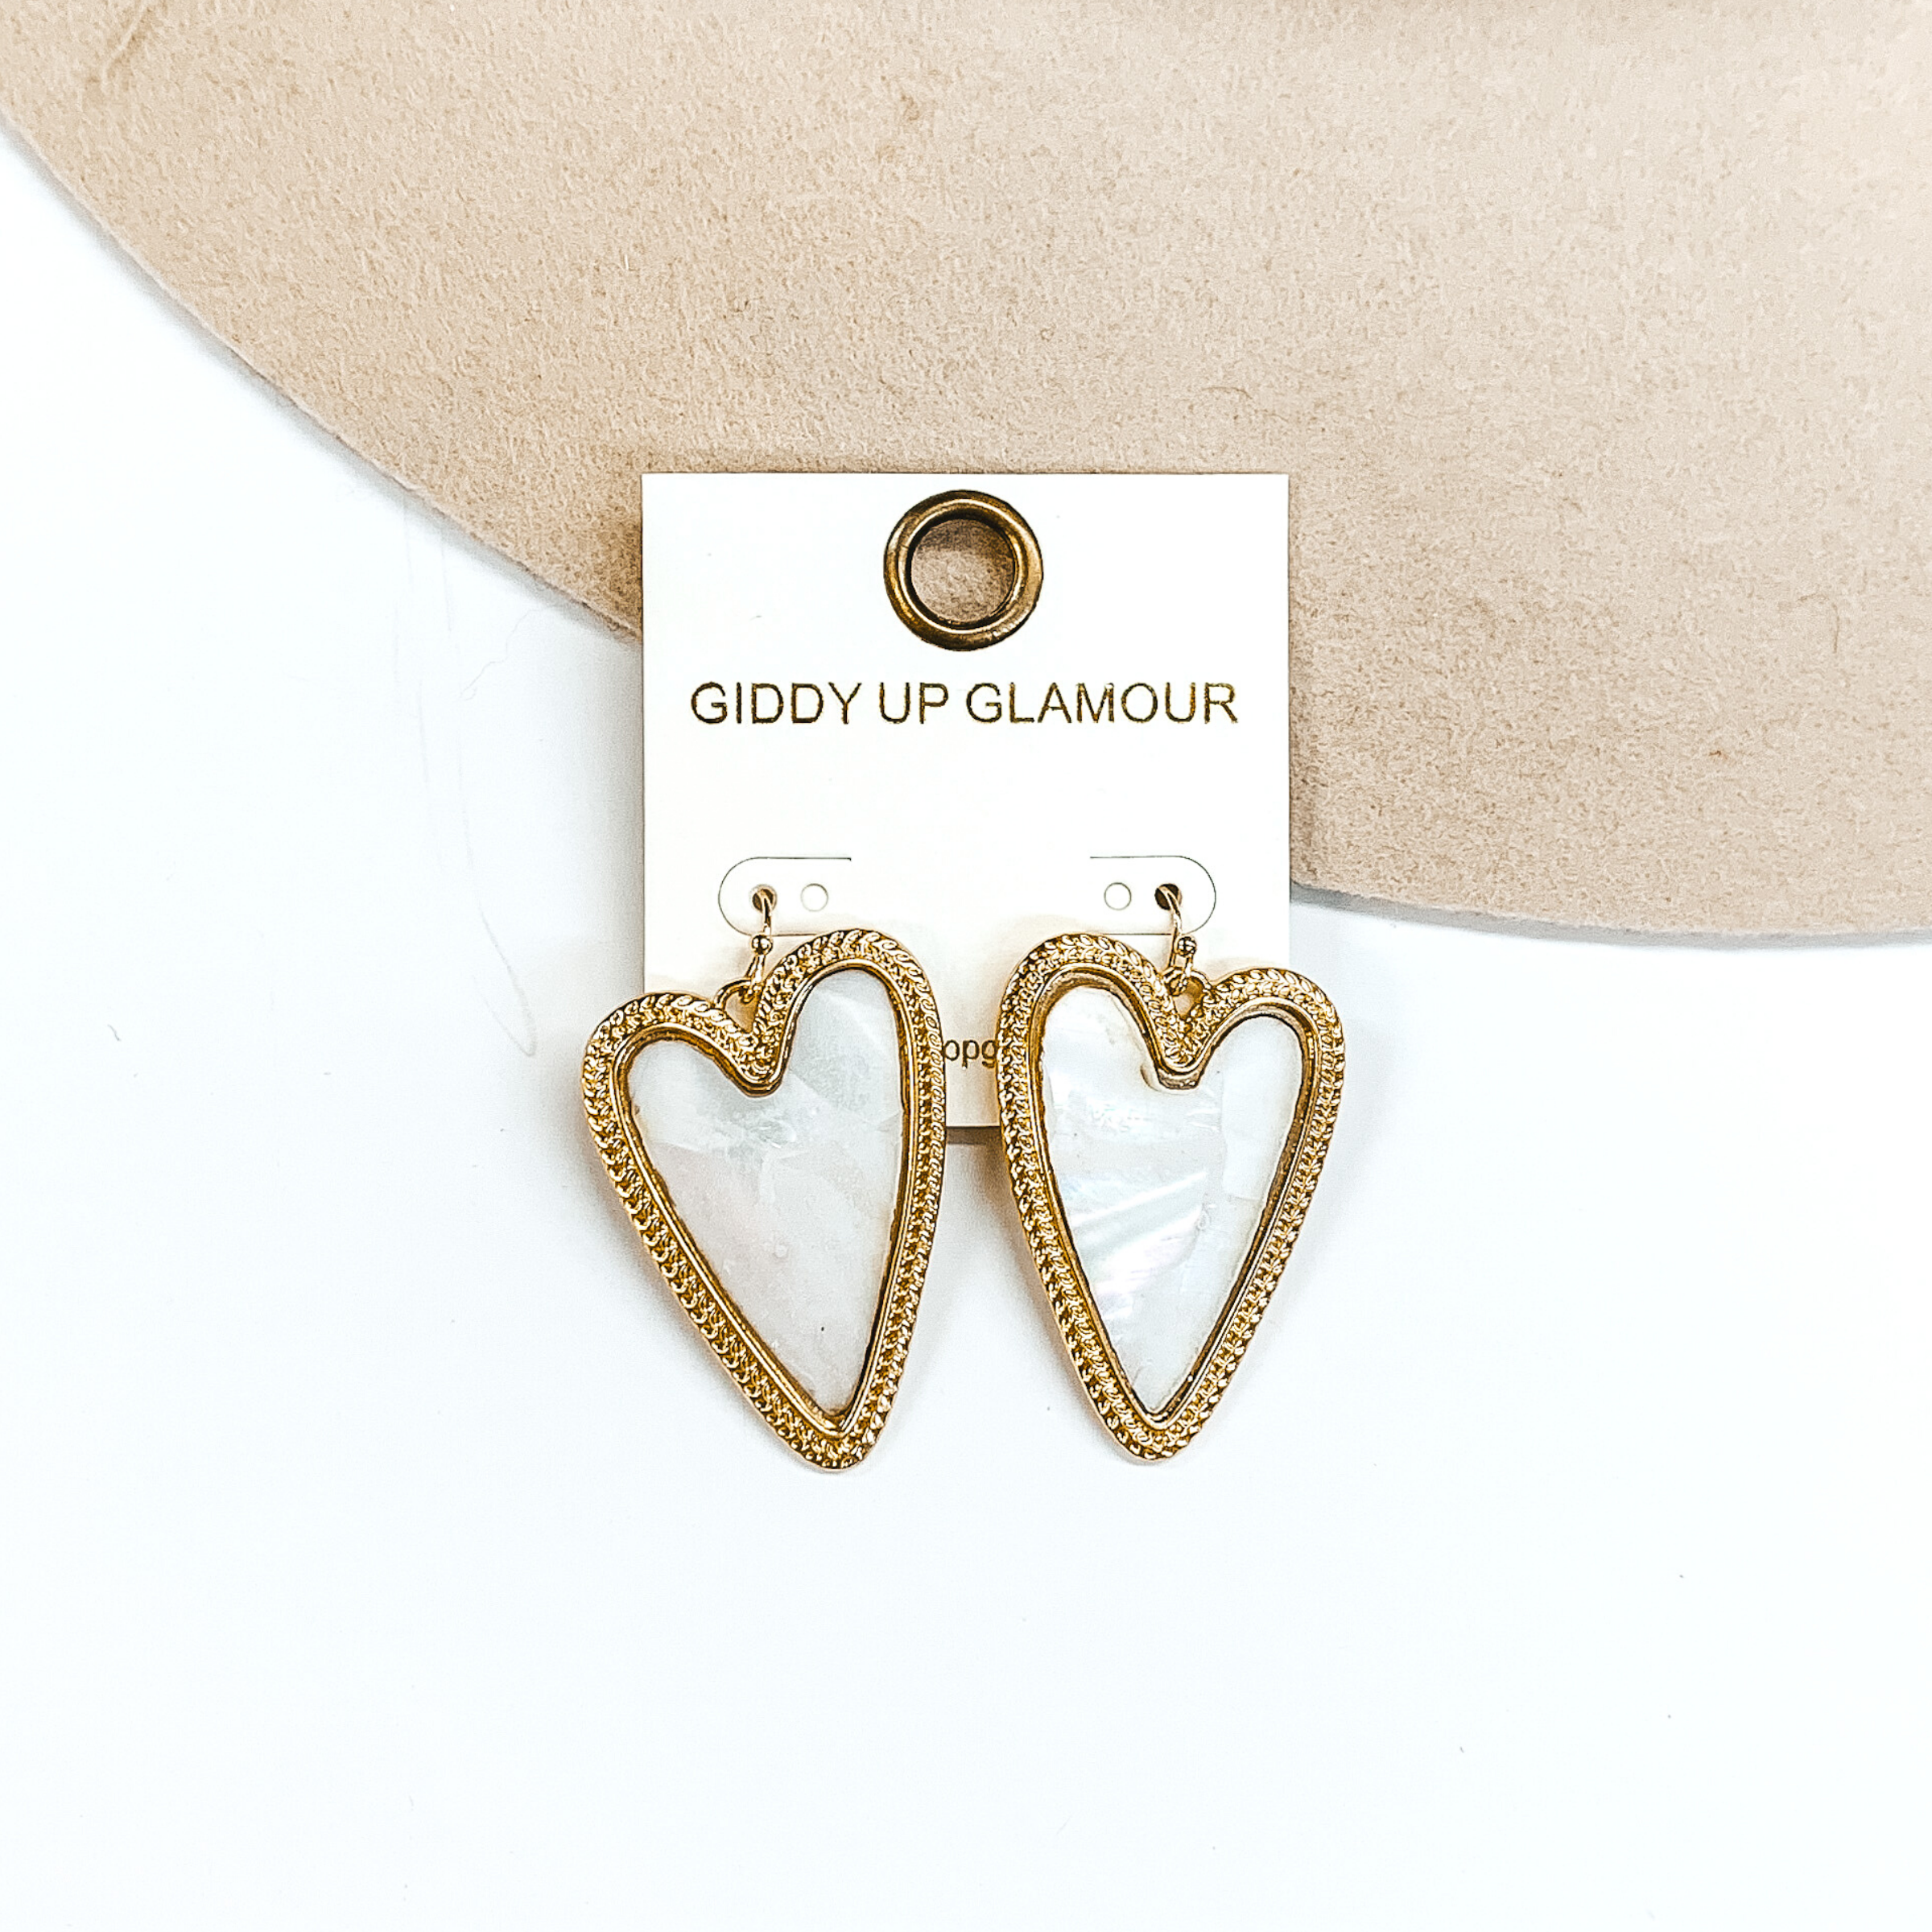 Ivory shell, heart shaped dangle earrings outlined in gold. These earrings are pictured on a white and beige background. 